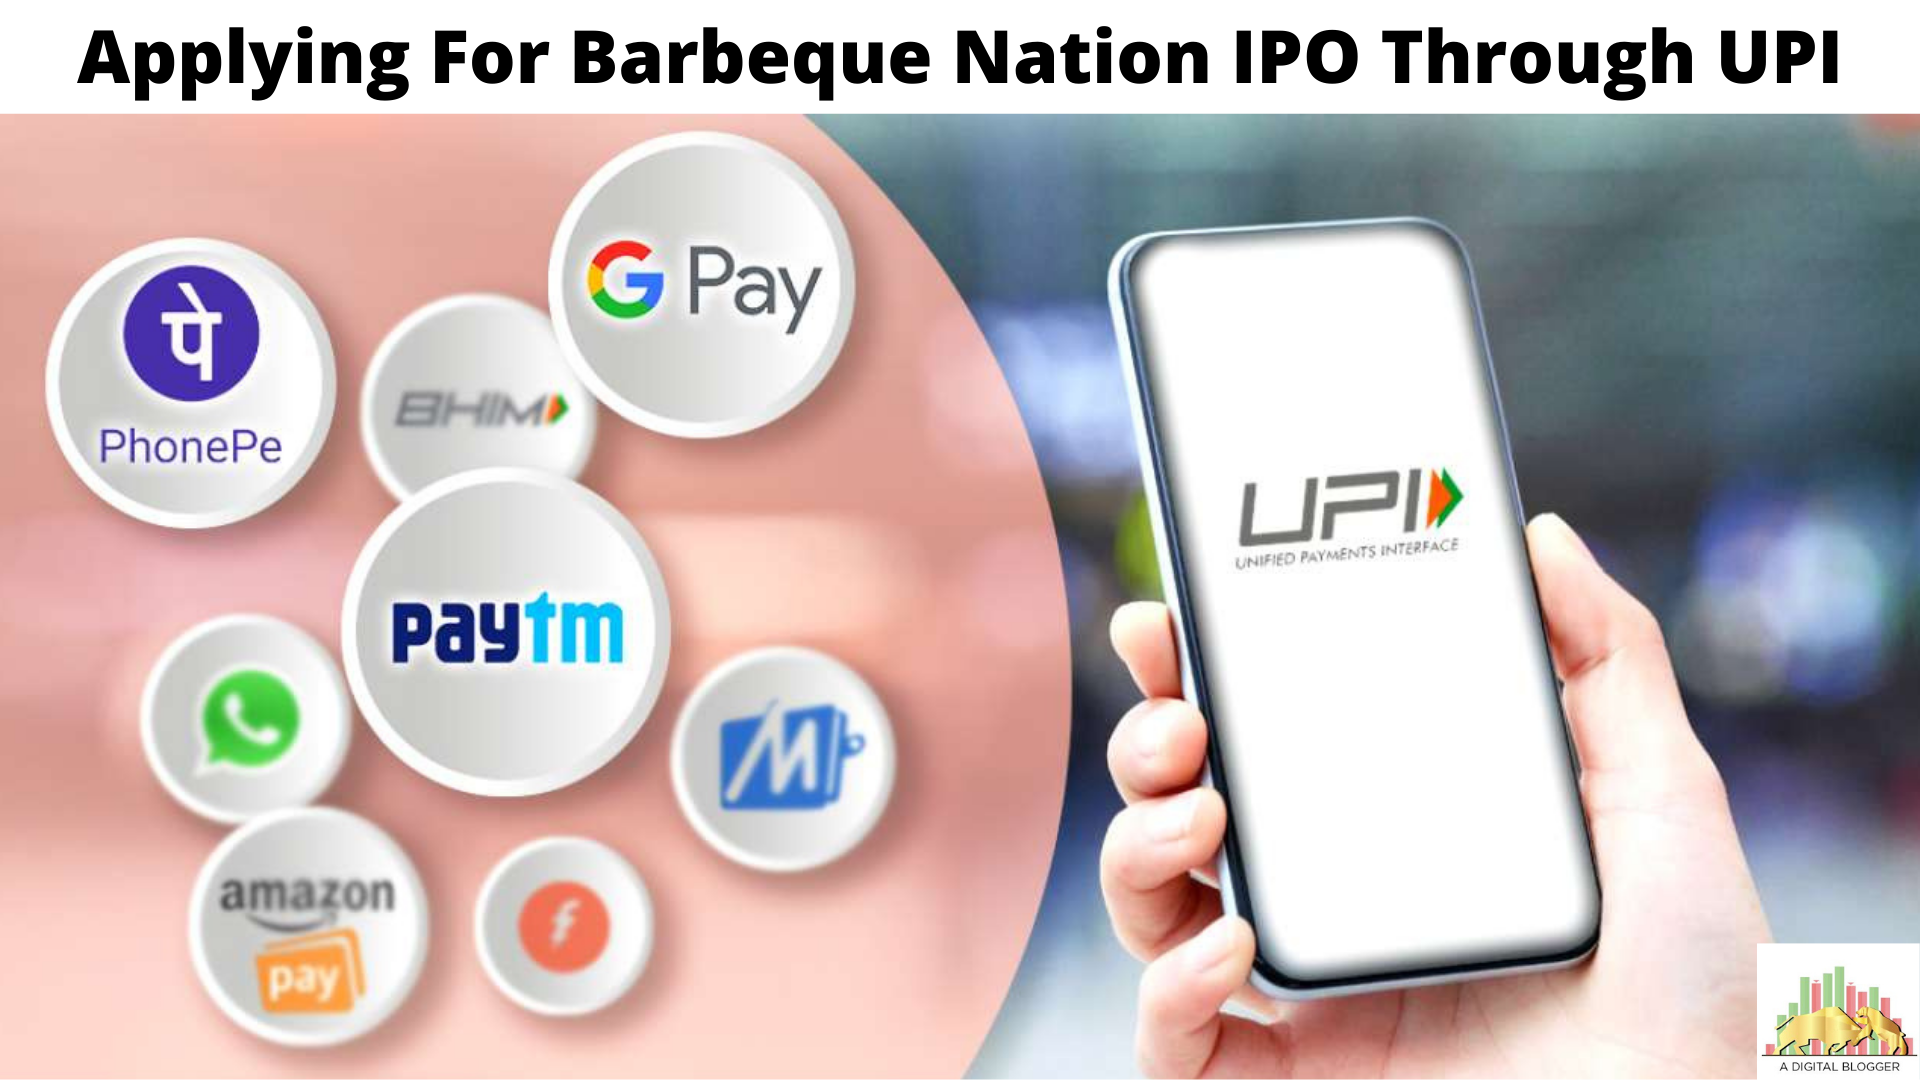 Applying For Barbeque Nation IPO Through UPI